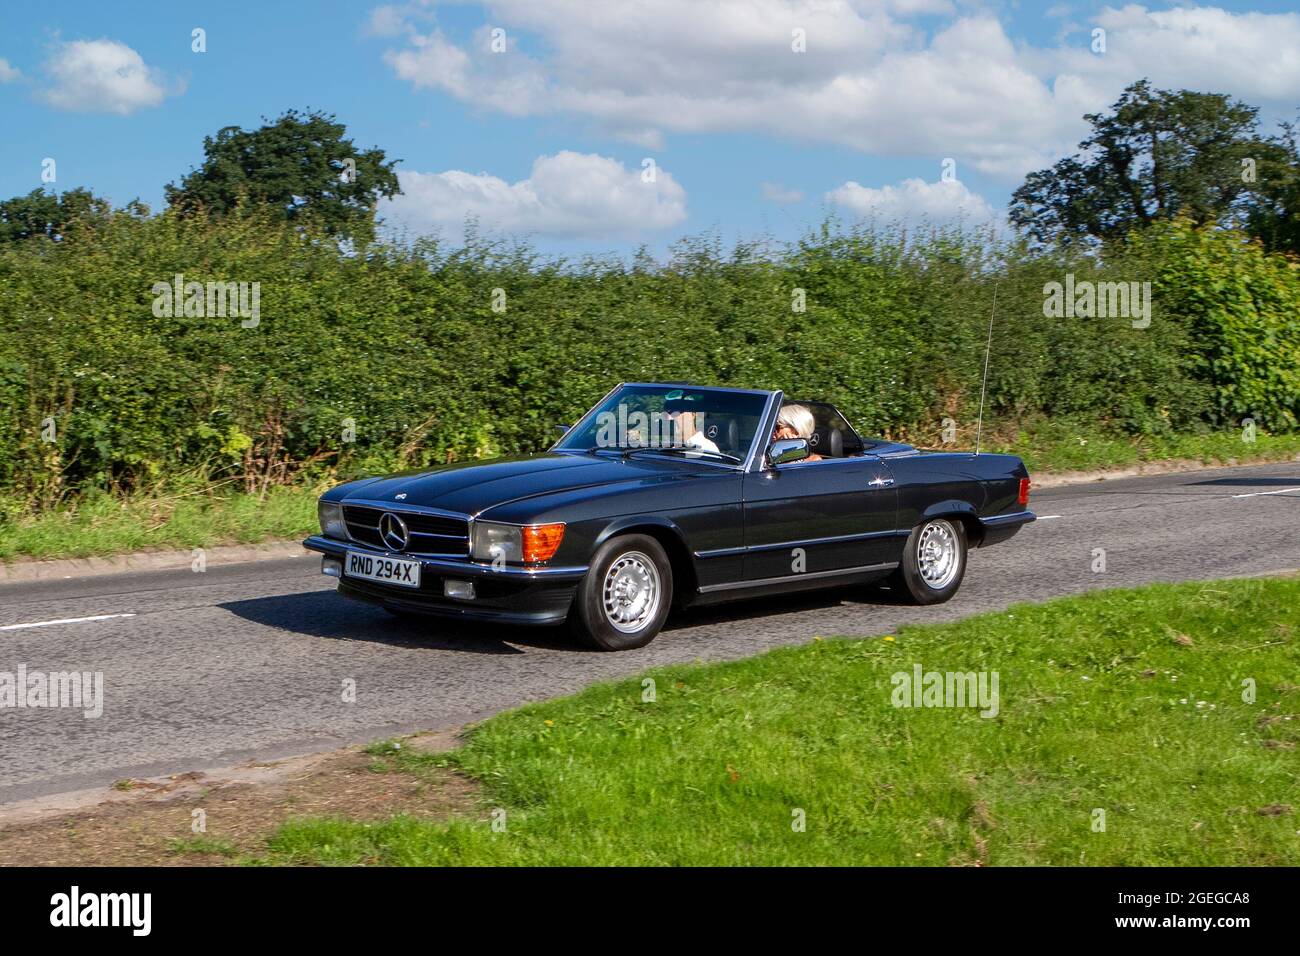 A front view of 1980s 80s Petrol Black Mercedes 280 Sl Roadster vintage classic car retro driver vehicle automobile Stock Photo